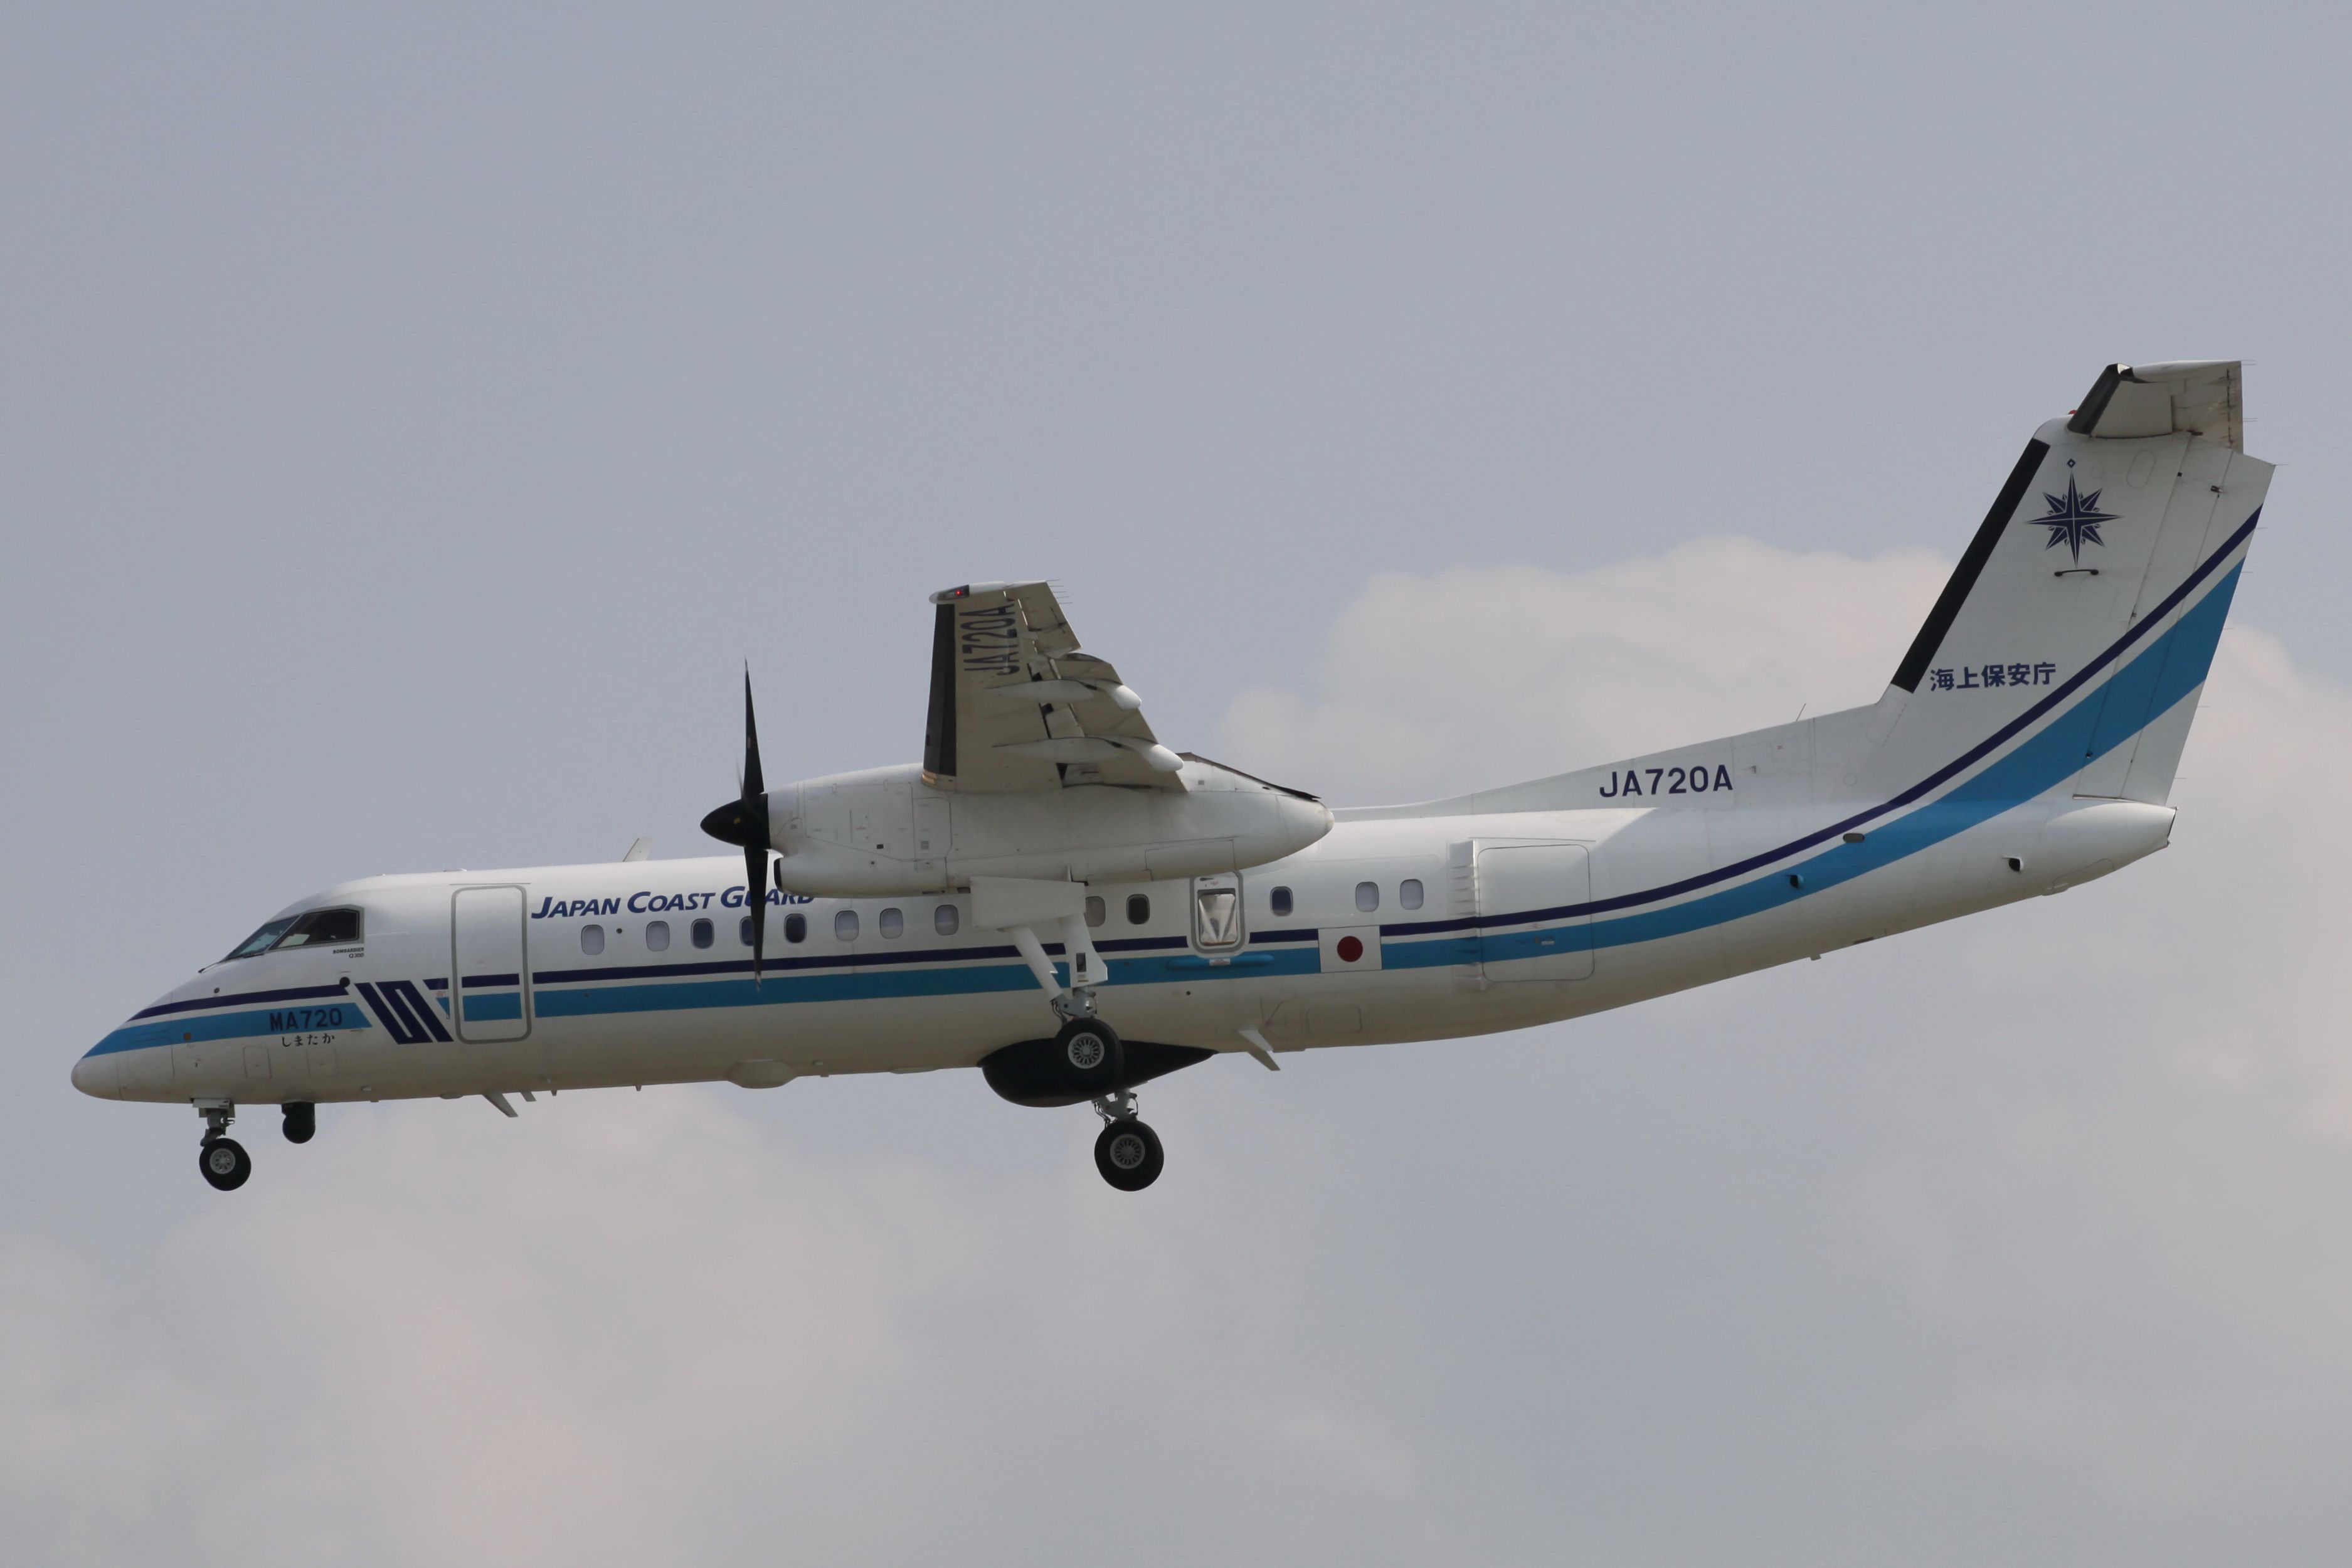 A Japan Coast Guard Bombardier Dash 8 flying in the sky.